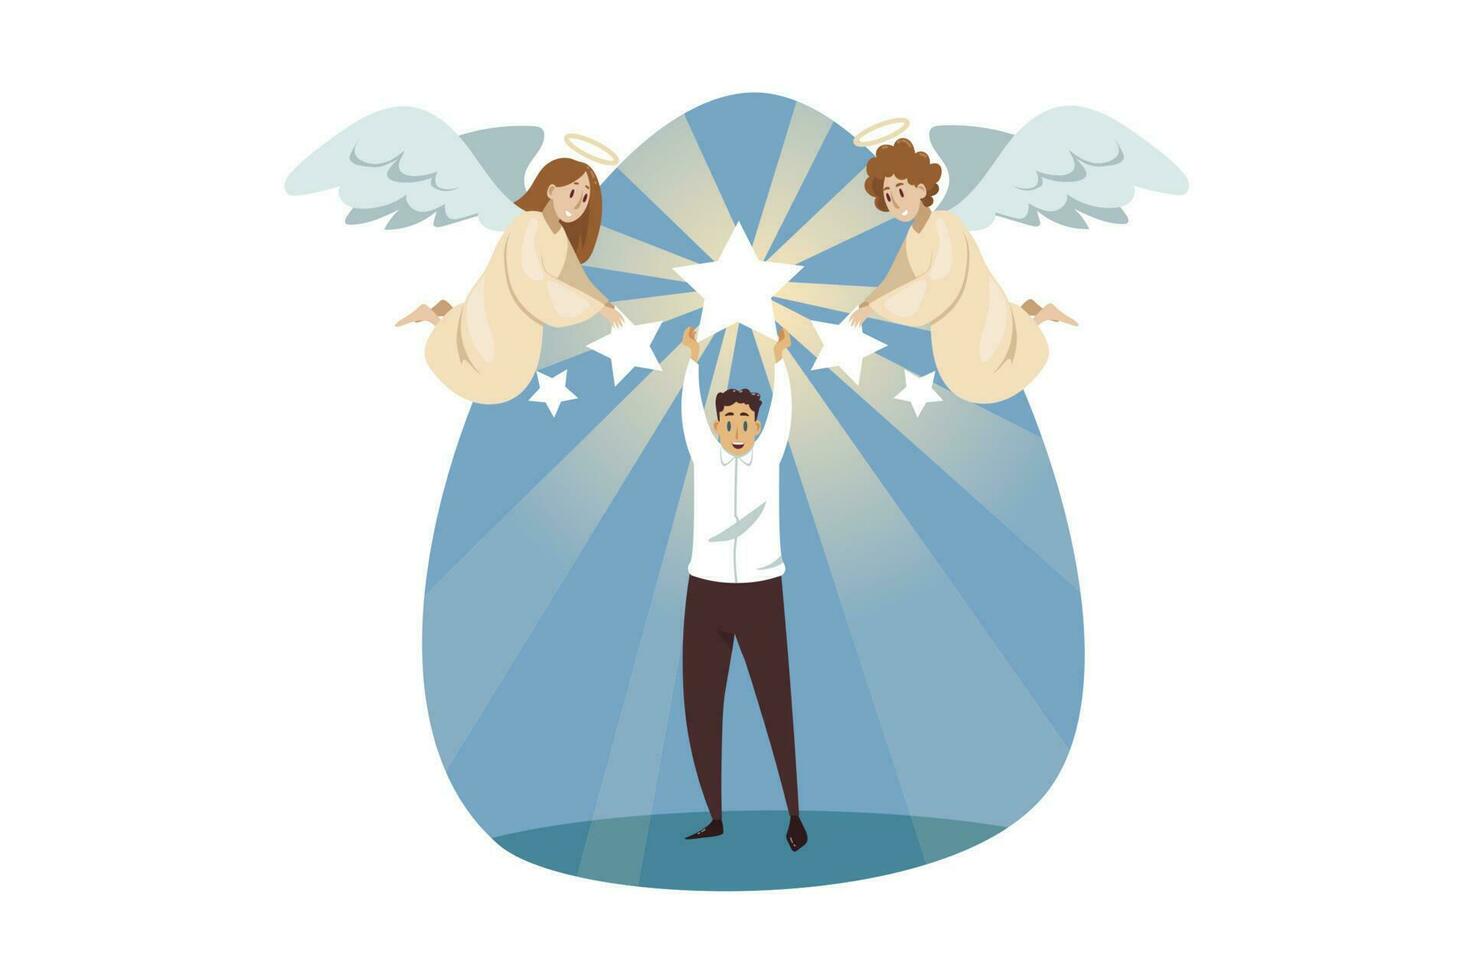 Religion, christianity, support, success, goal achievement concept. Angels biblical characters helping glorifying young businessman clerk manager holding shining star. Divine assistance illustration. vector